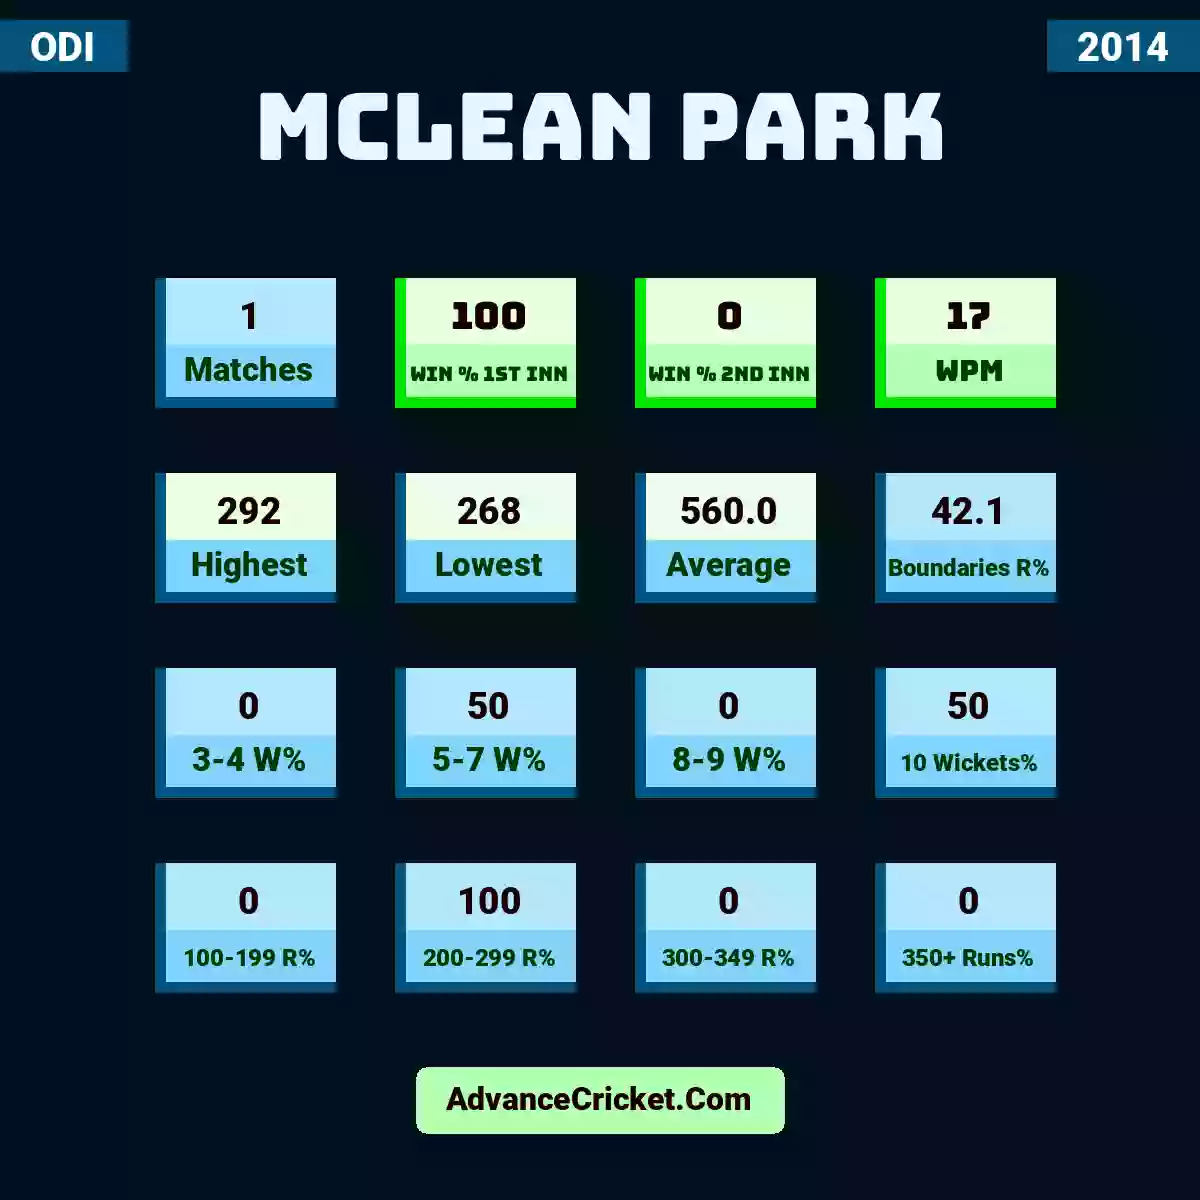 Image showing McLean Park with Matches: 1, Win % 1st Inn: 100, Win % 2nd Inn: 0, WPM: 17, Highest: 292, Lowest: 268, Average: 560.0, Boundaries R%: 42.1, 3-4 W%: 0, 5-7 W%: 50, 8-9 W%: 0, 10 Wickets%: 50, 100-199 R%: 0, 200-299 R%: 100, 300-349 R%: 0, 350+ Runs%: 0.